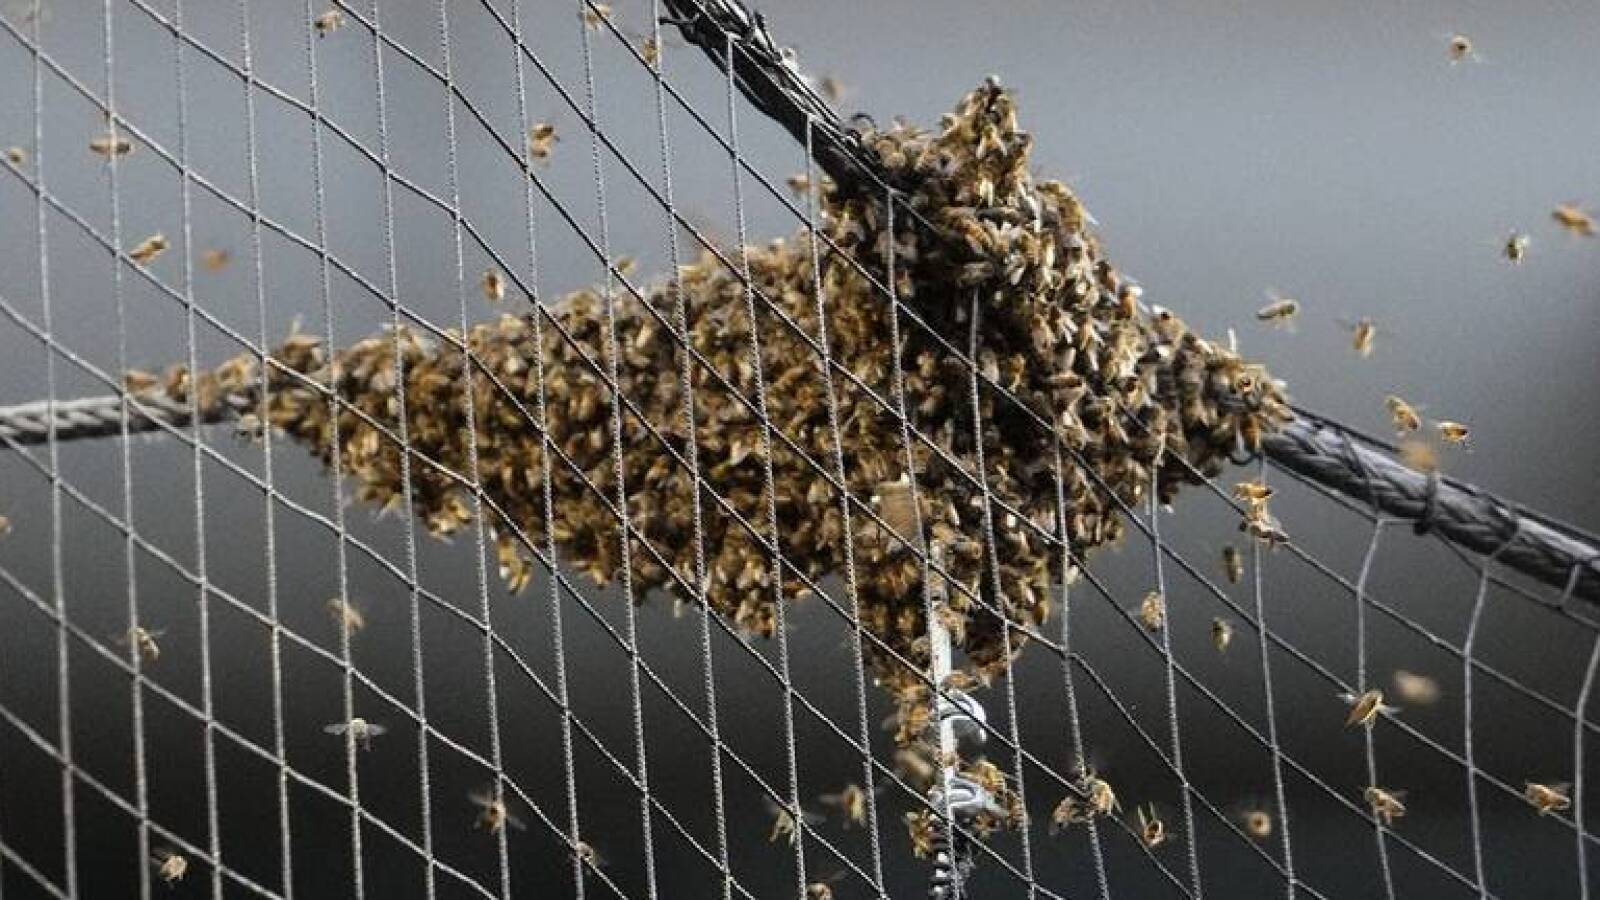 Watch: Swarm of bees delays Dodgers-Diamondbacks game for nearly two hours